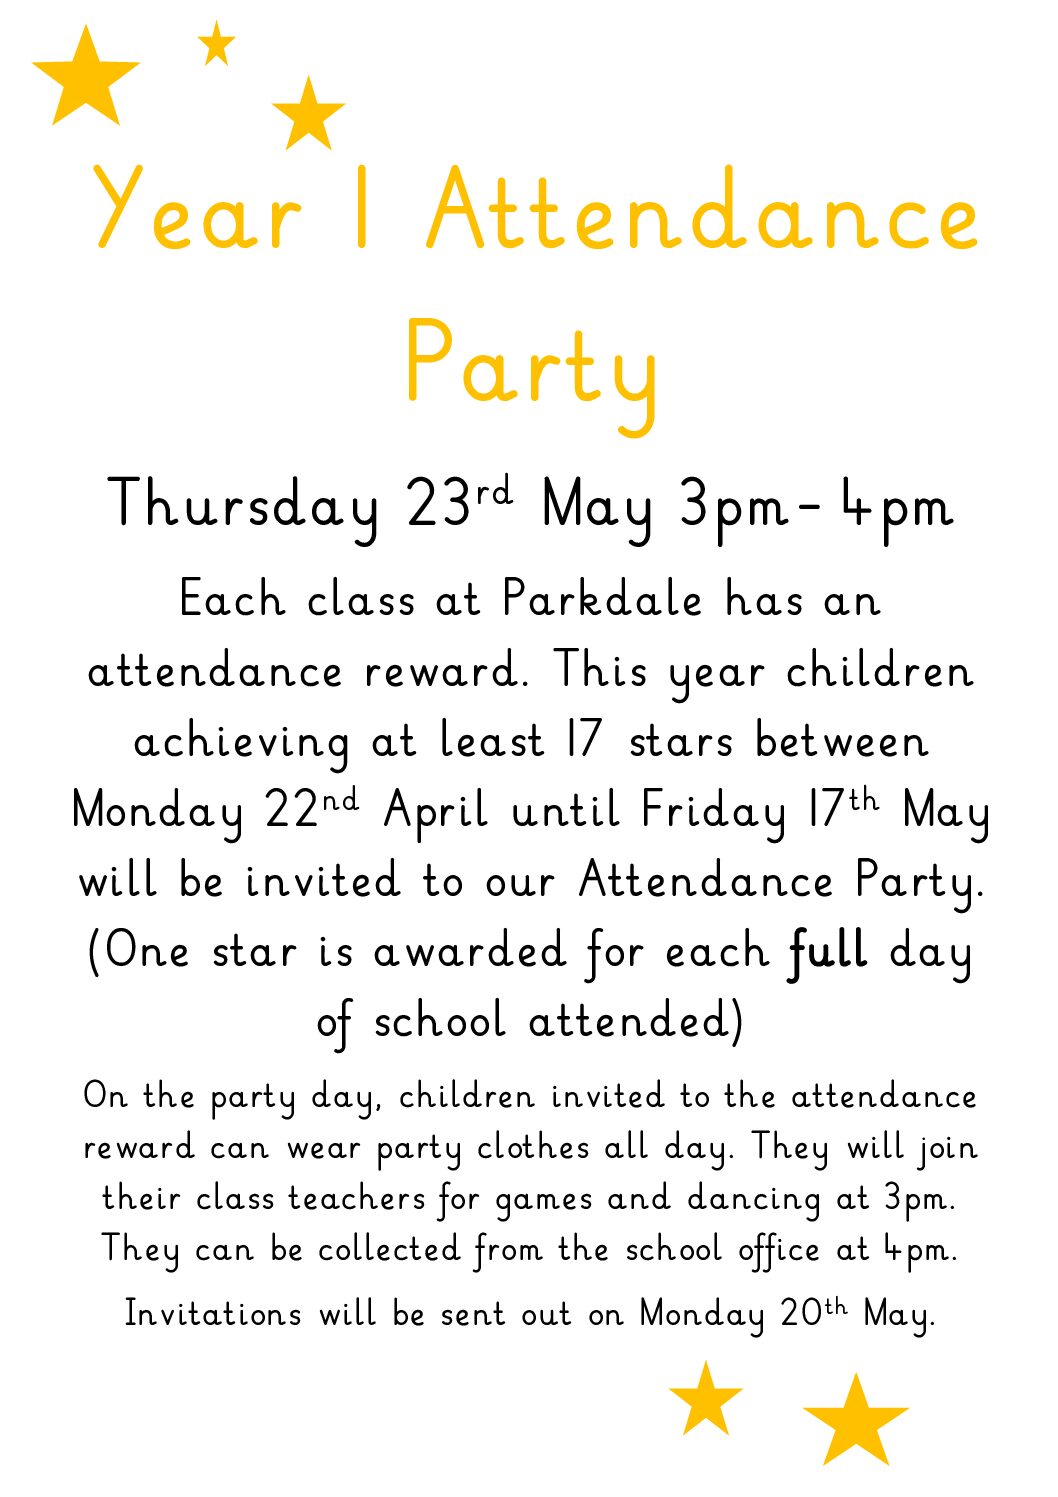 Year 1 Attendance Party